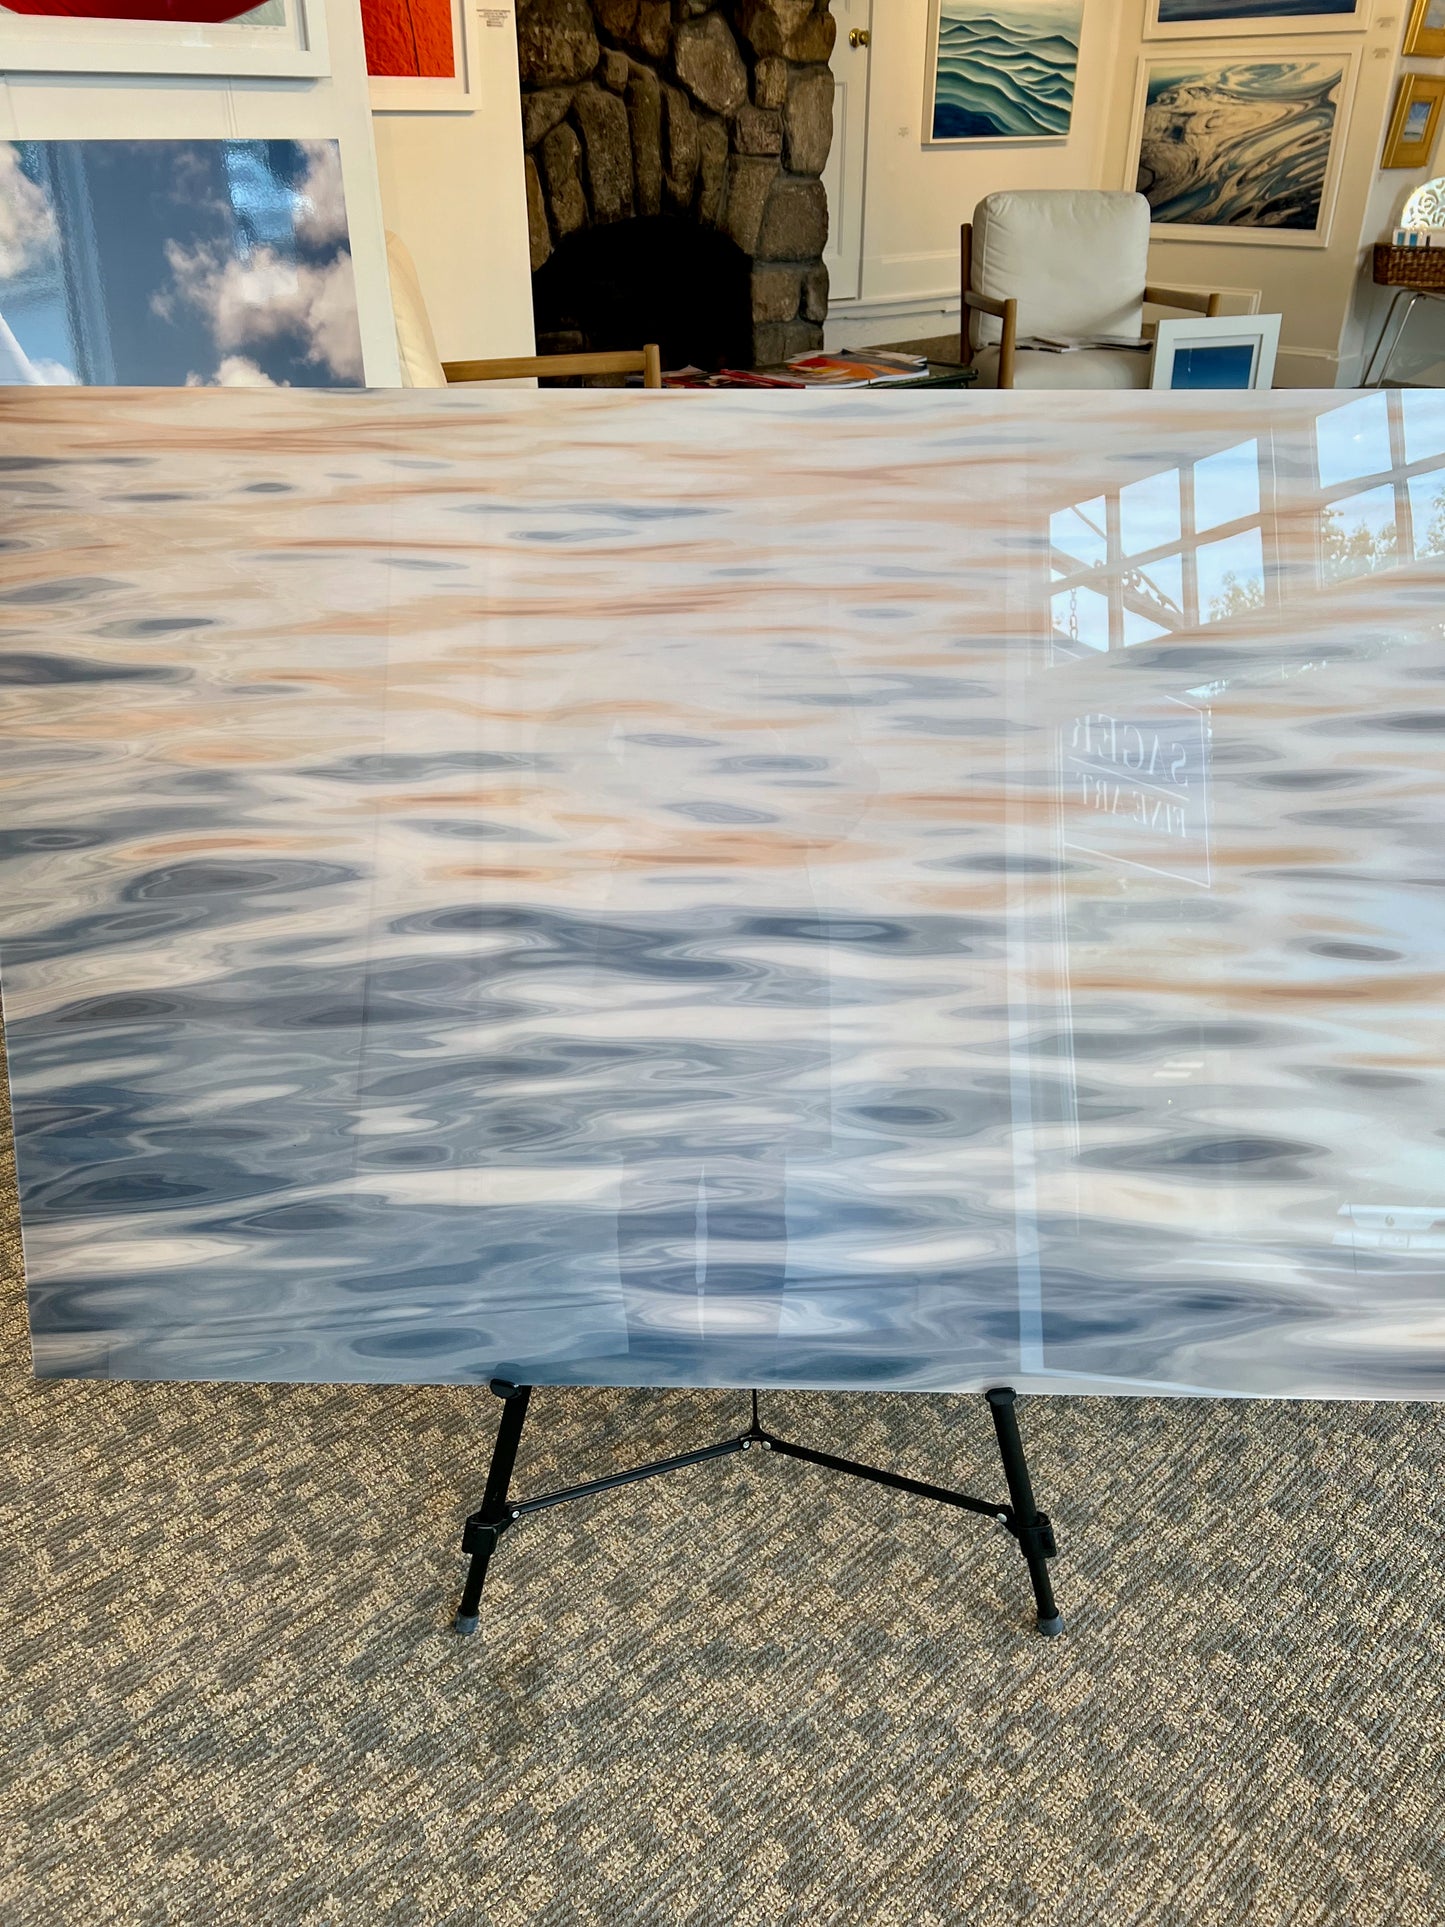 30x45" Print Under Acrylic: Steamship Abstract (Gallery Display)